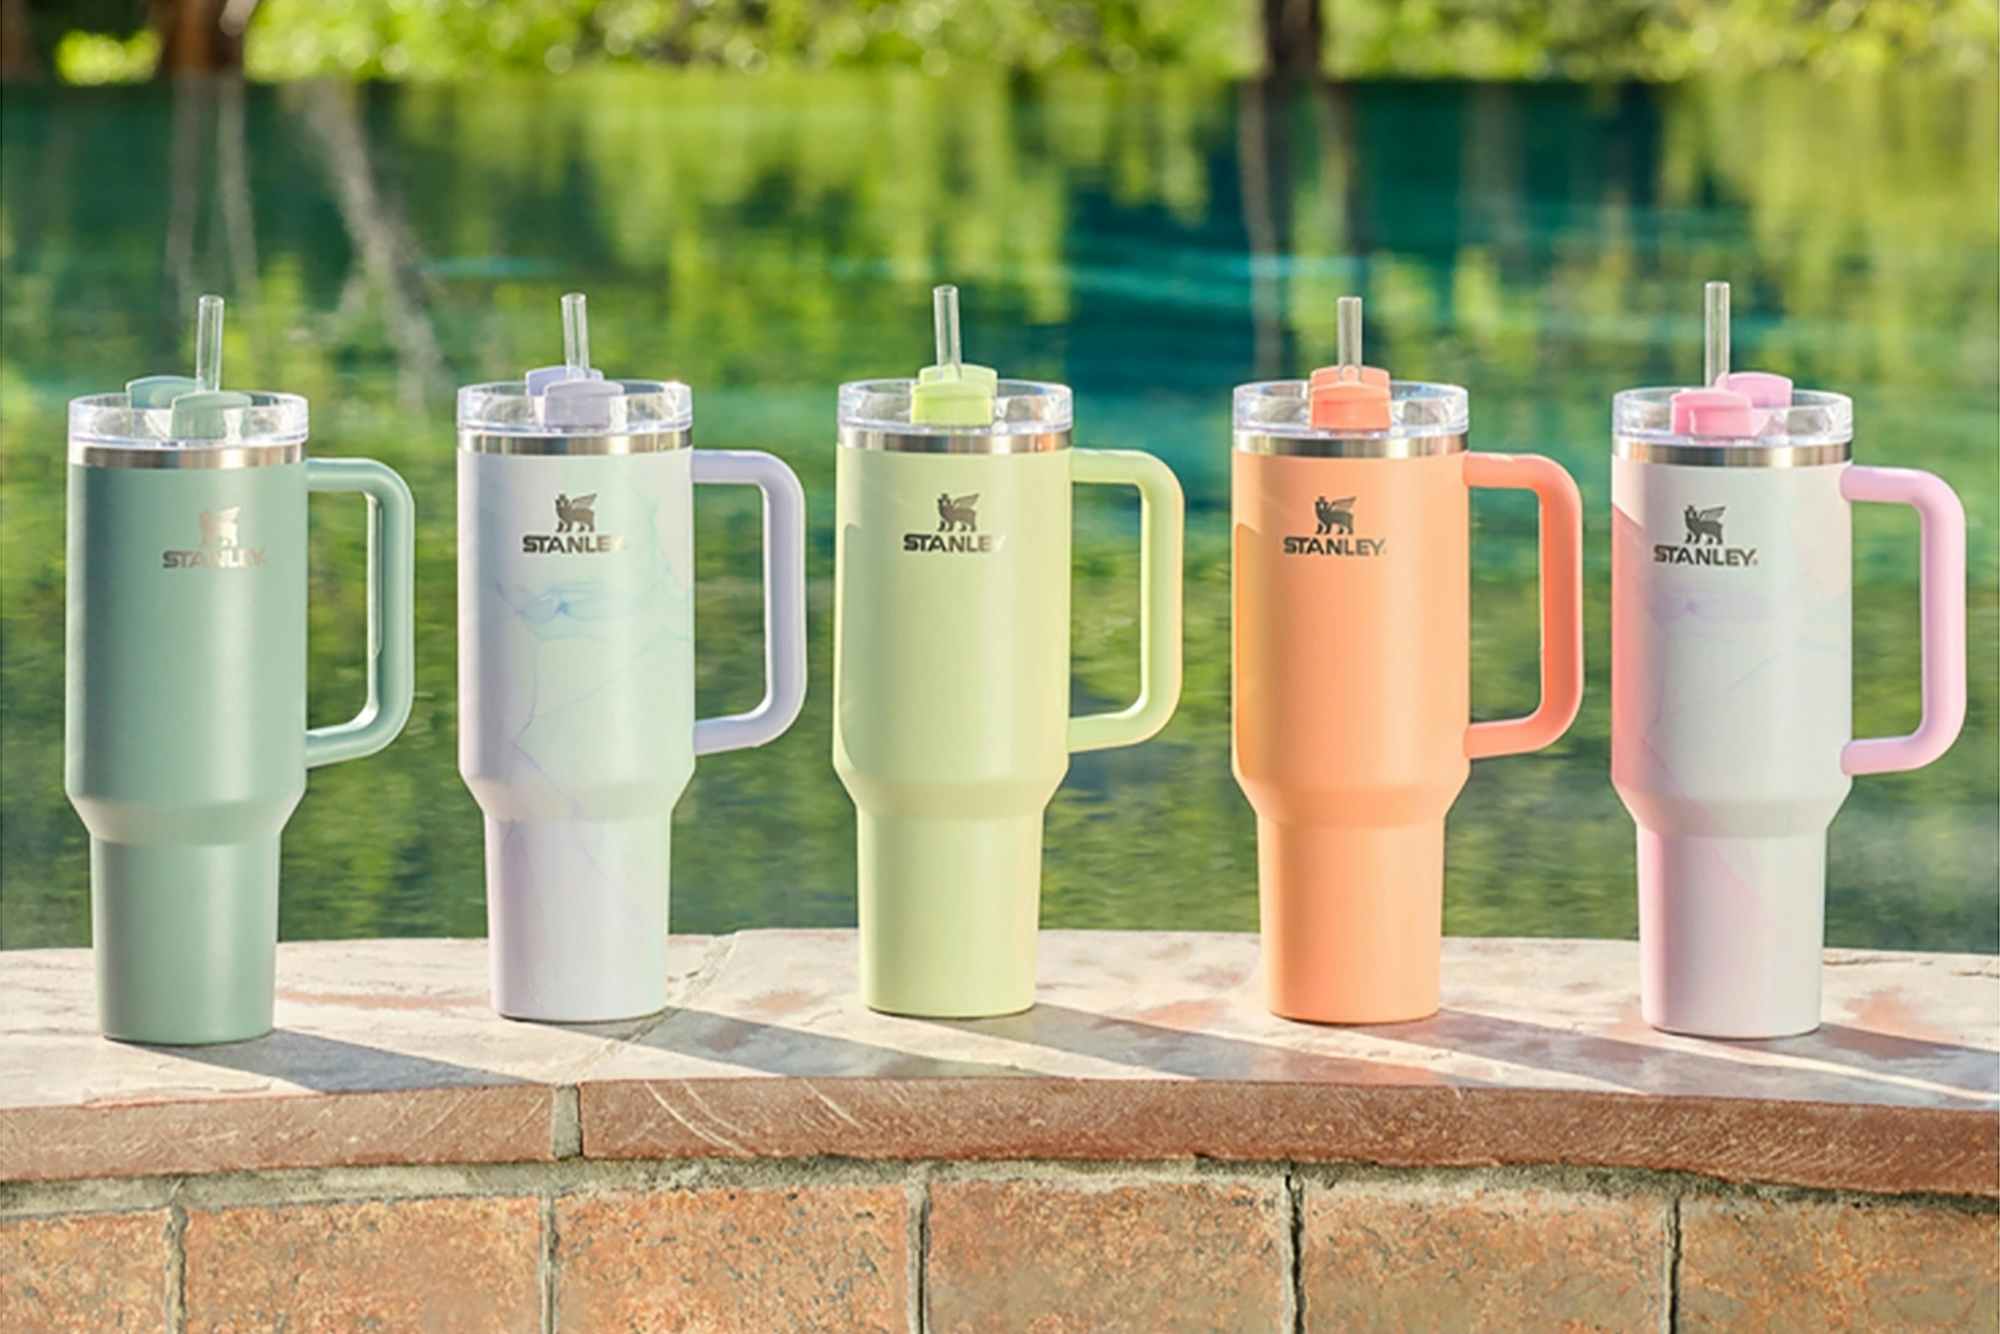 https://prod-cdn-thekrazycouponlady.imgix.net/wp-content/uploads/2022/07/target-new-stanley-tumblers-colors-official-media-1-1702648840-1702648840.jpg?auto=format&fit=fill&q=25